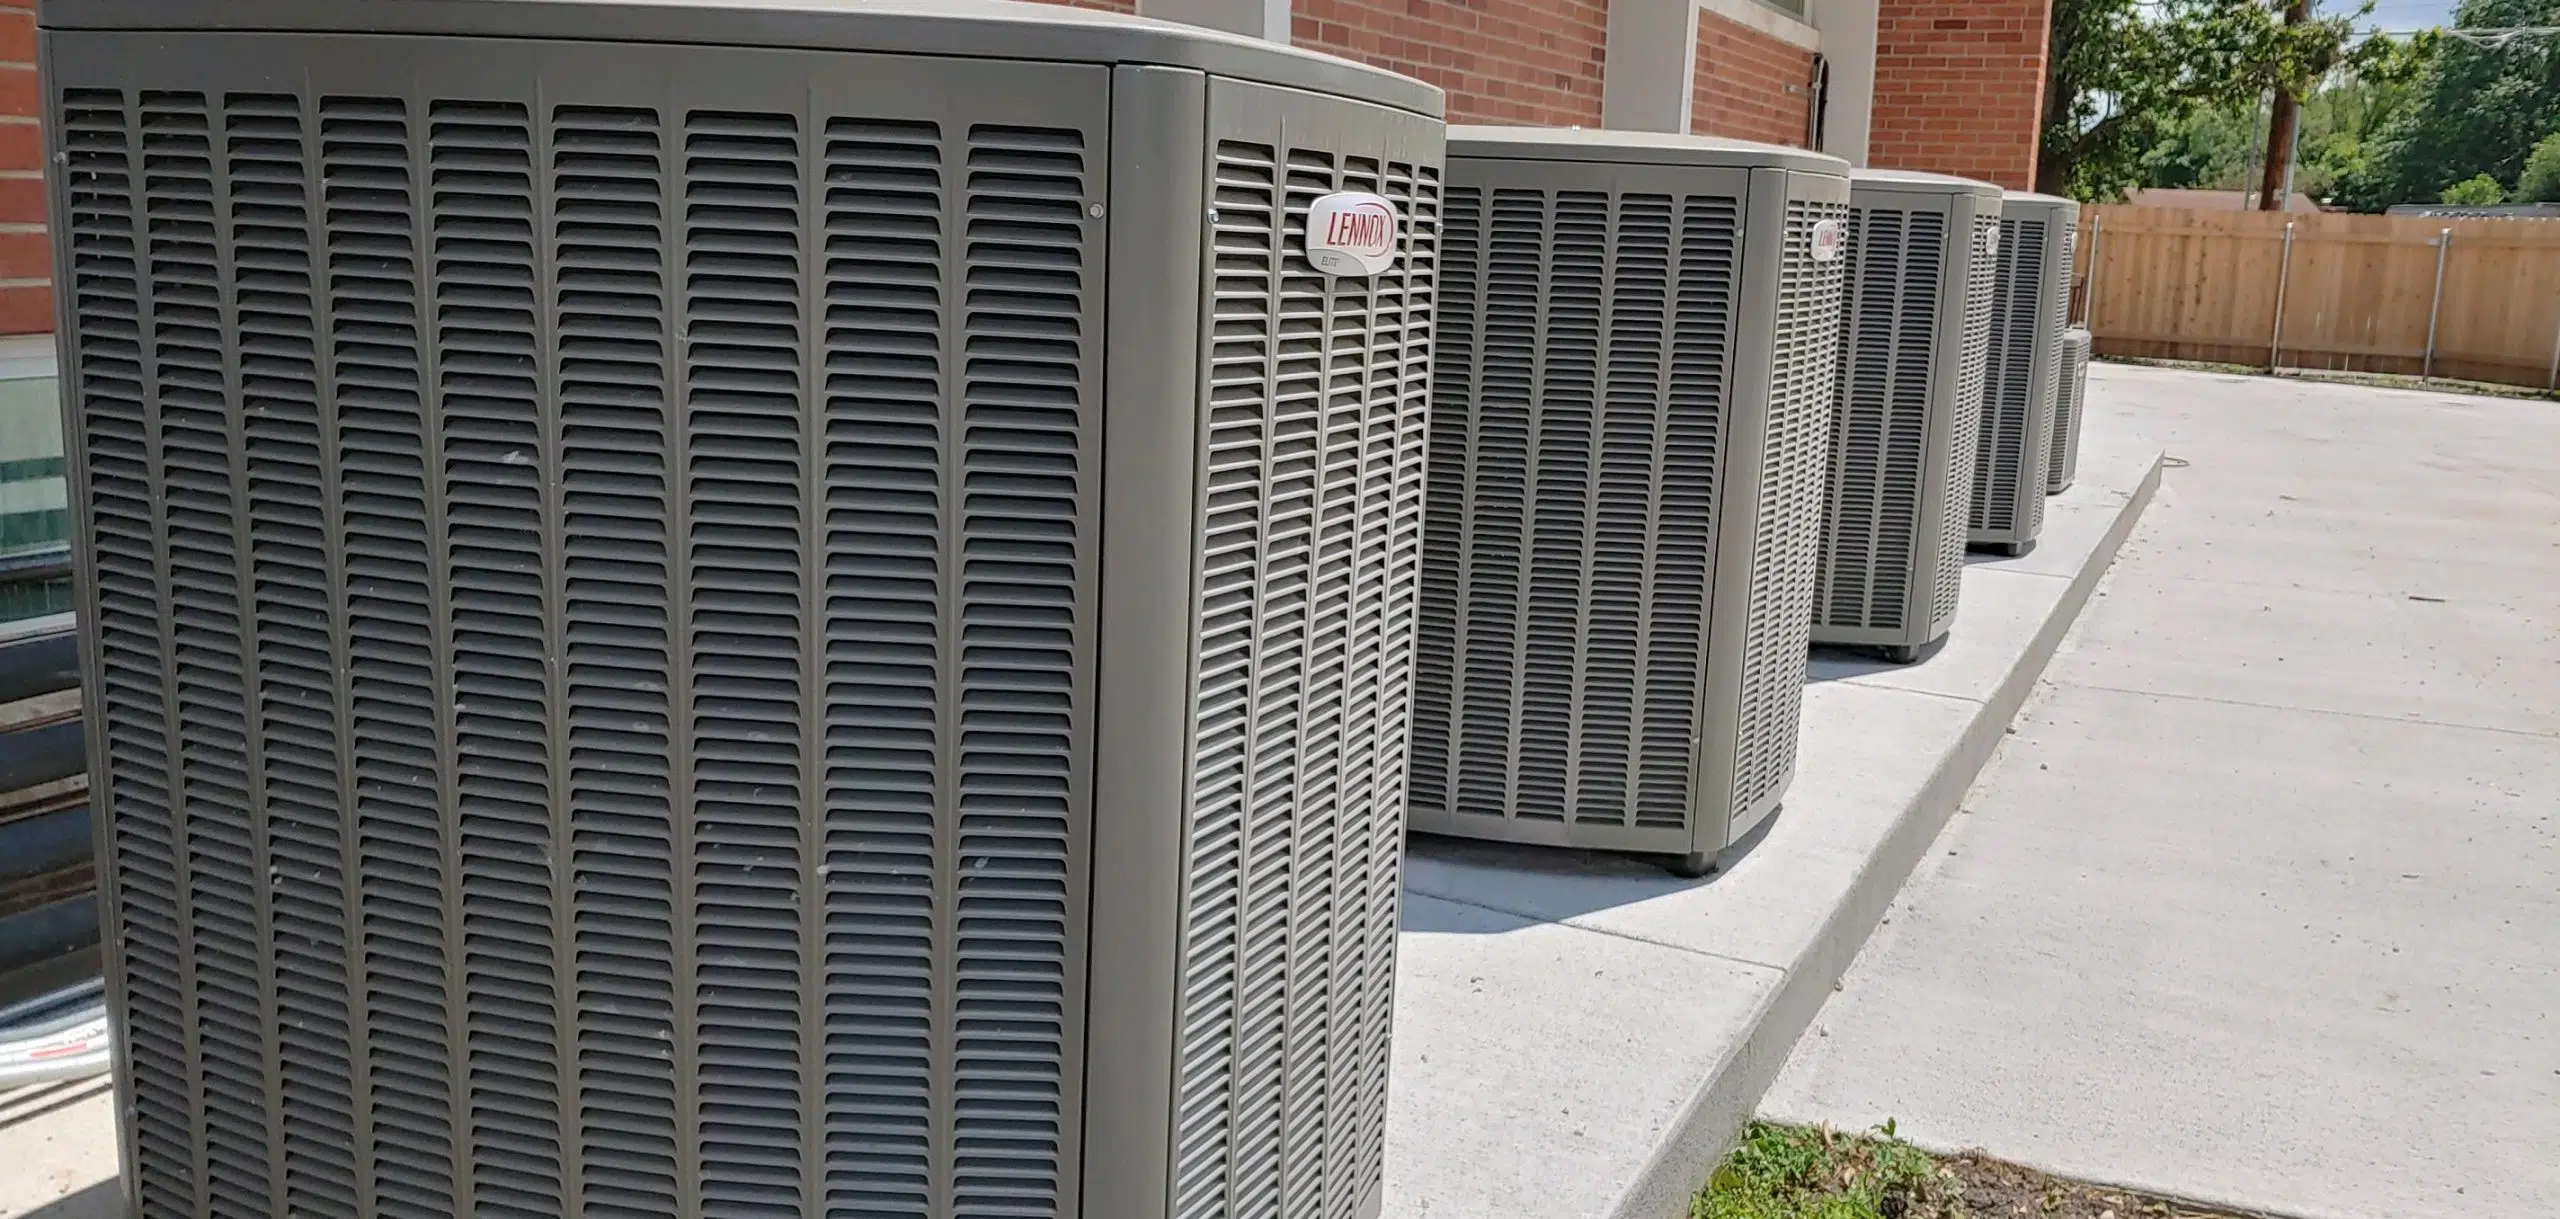 How to keep down costs as heat continues to rise; HVAC tech offers tips on cooling your home at an affordable price